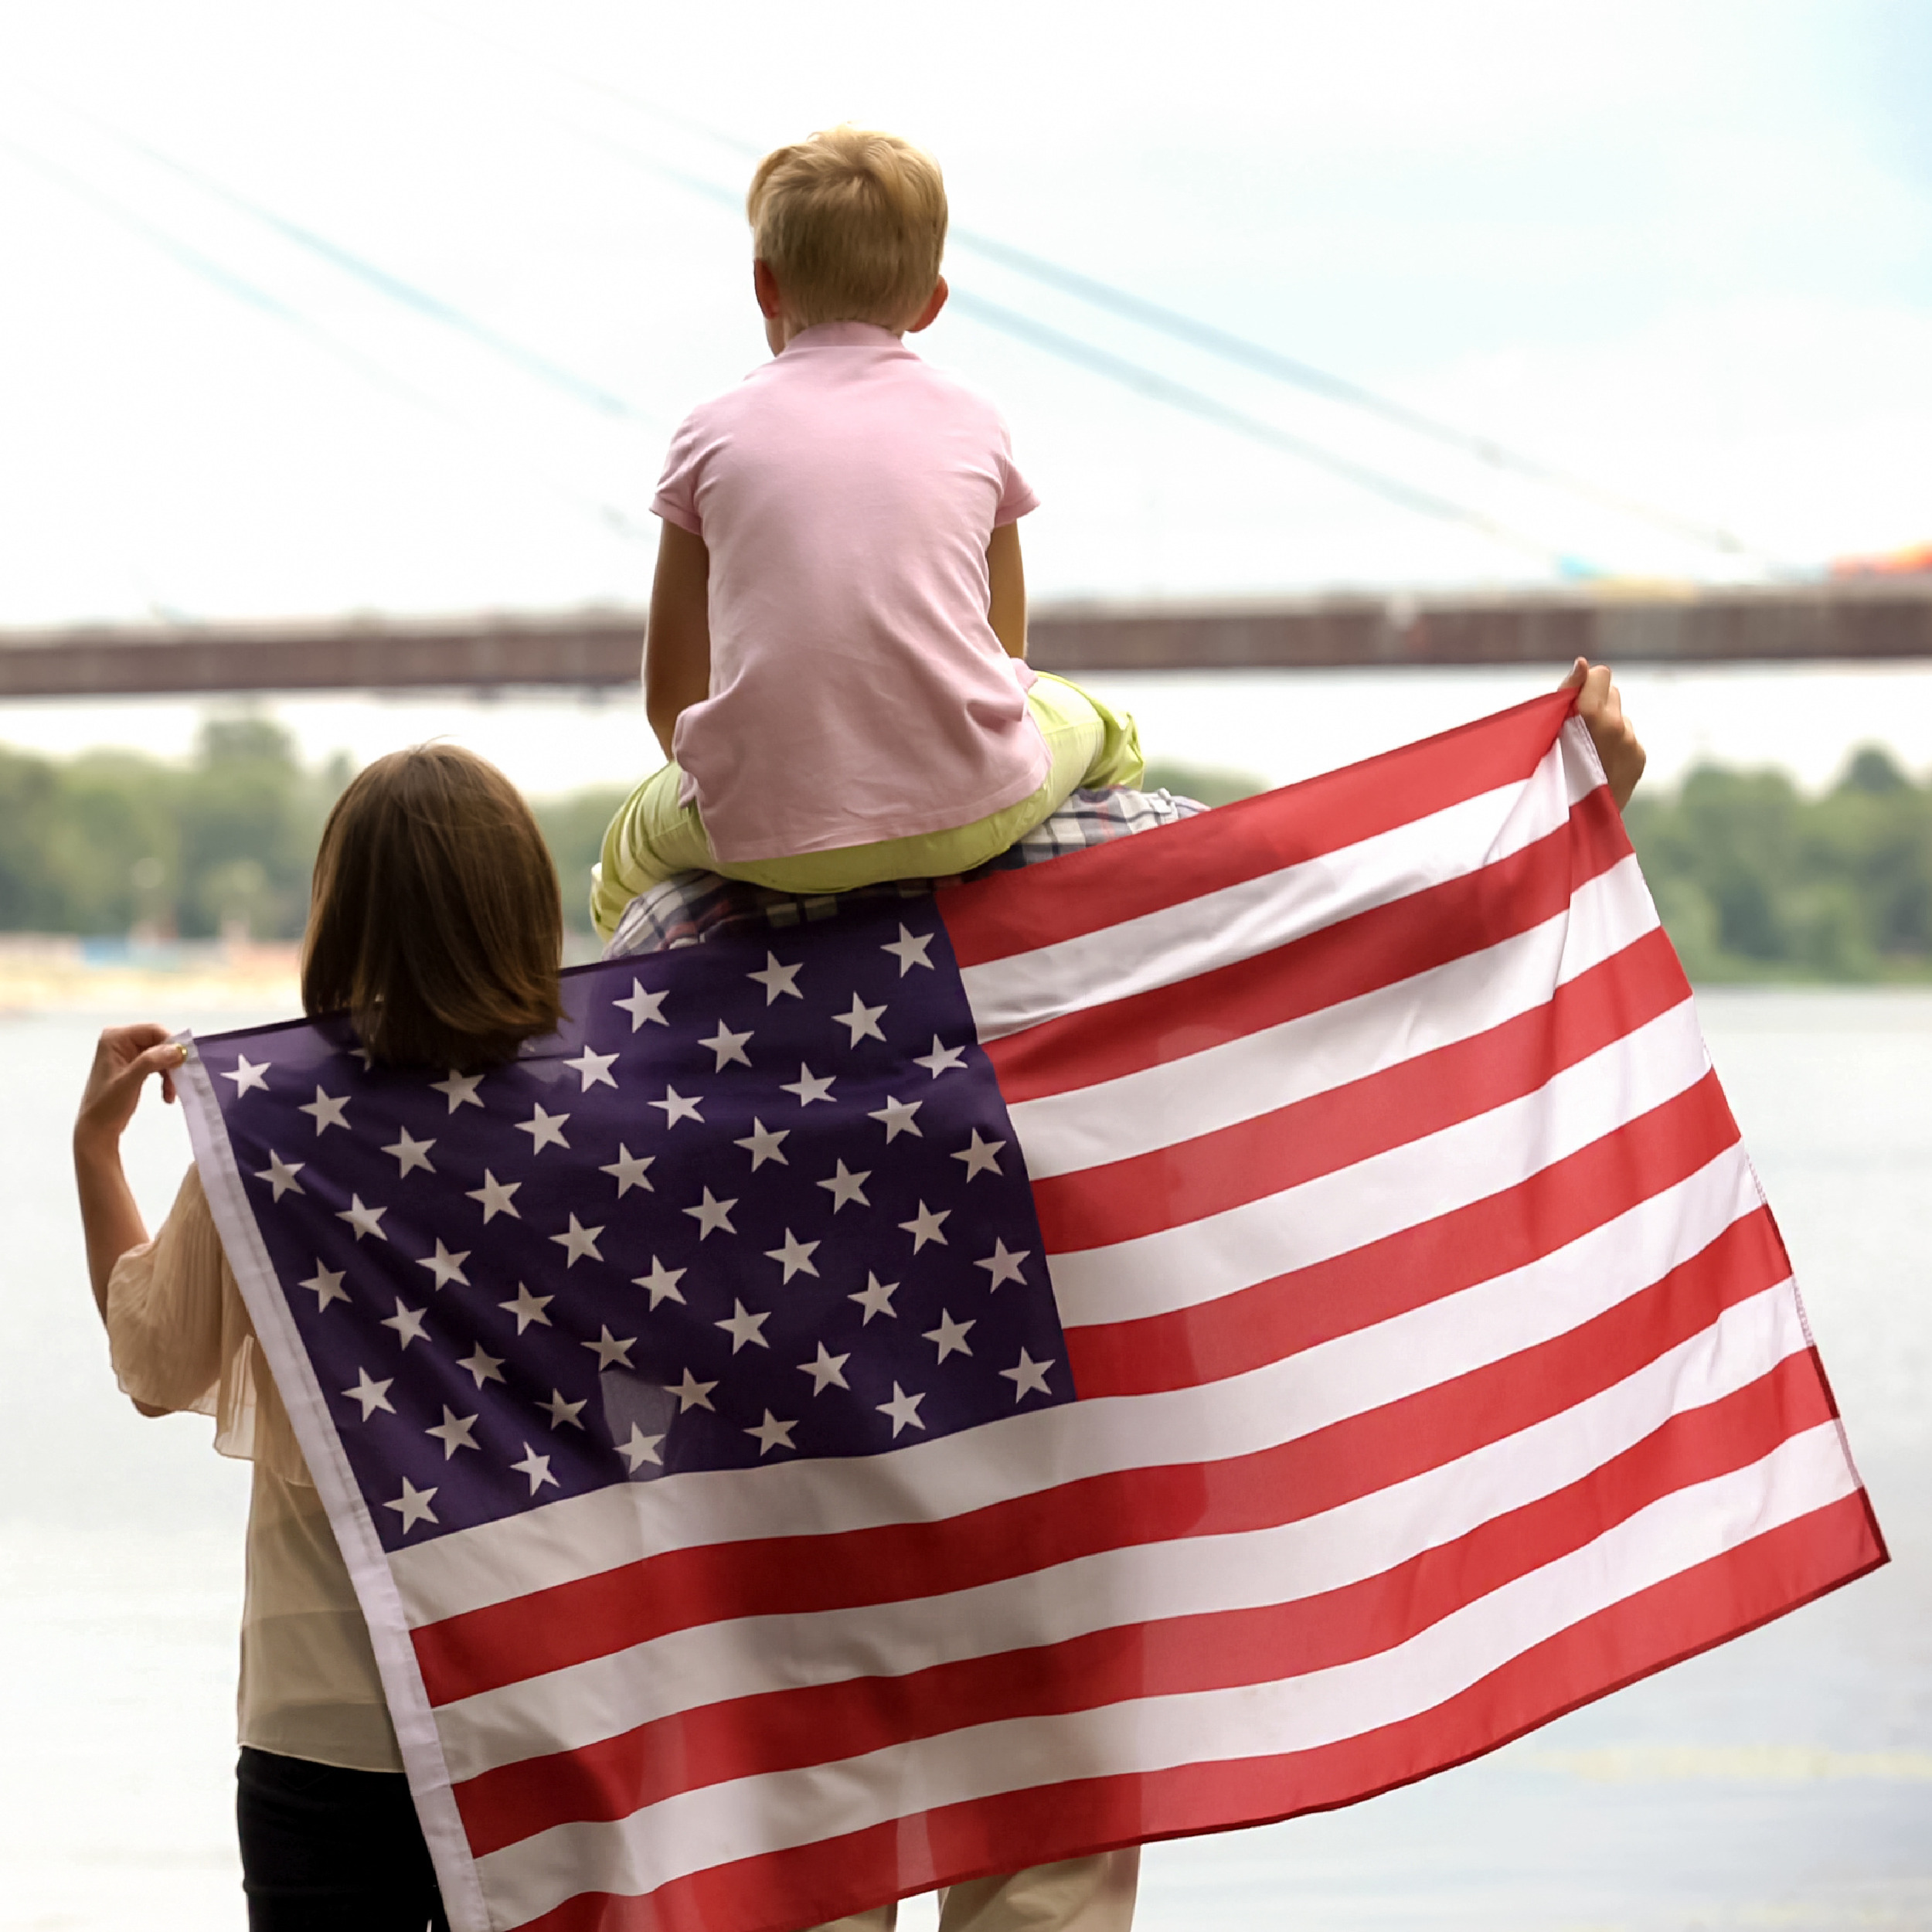 Family wrapped in American flag looking at bridge, immigration for better life